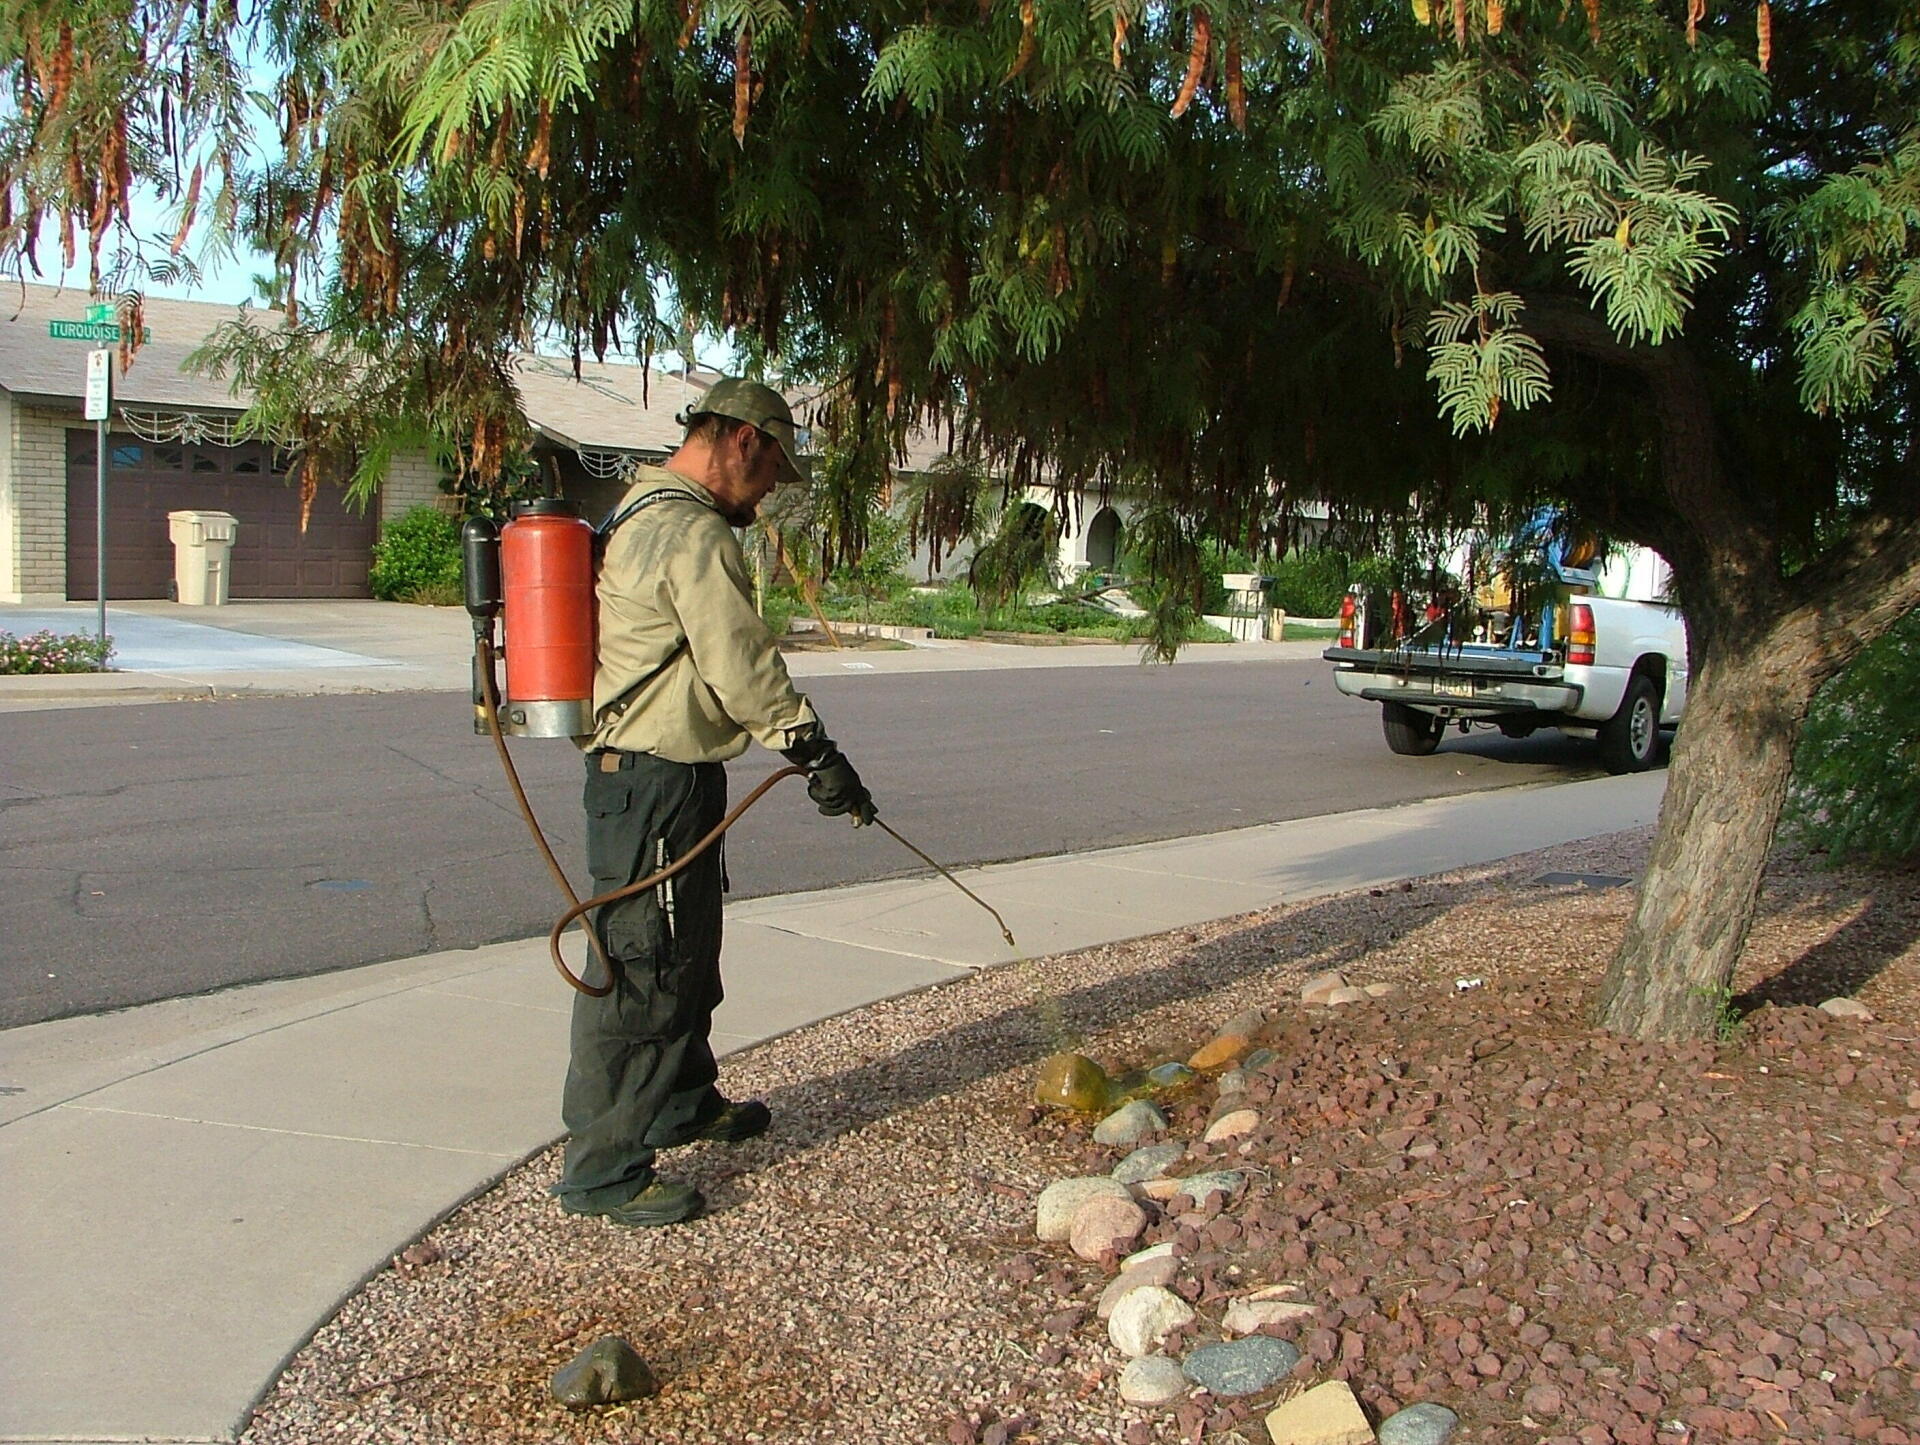 A technician spraying for weed control in Phoenix, AZ